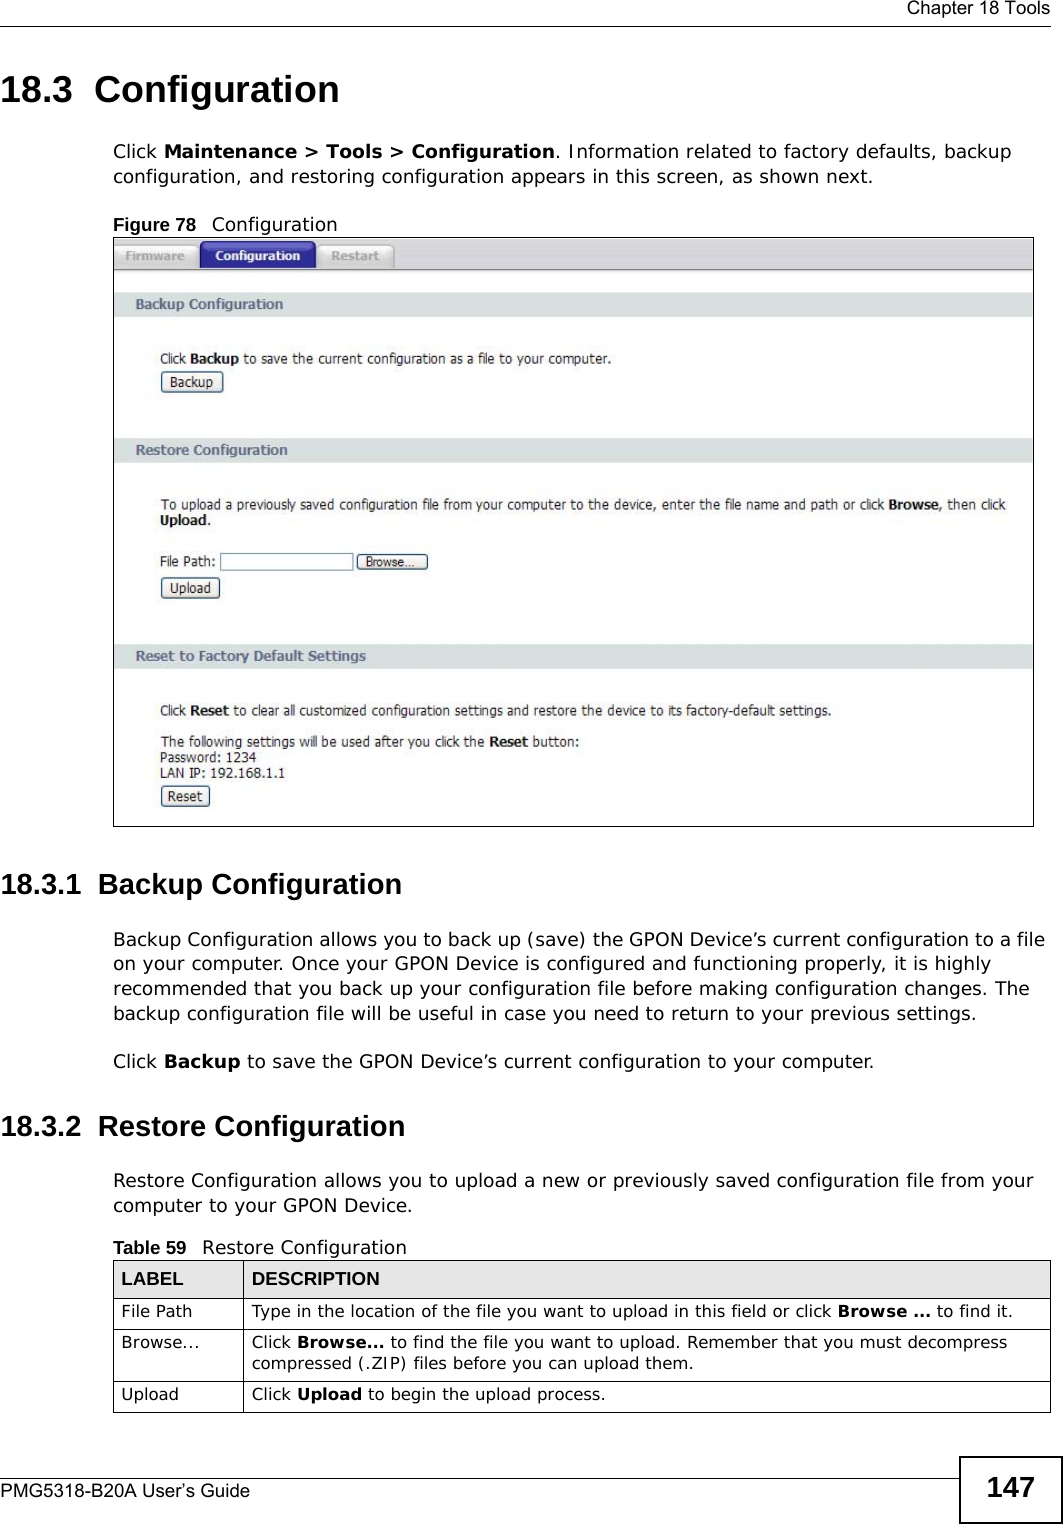  Chapter 18 ToolsPMG5318-B20A User’s Guide 14718.3  Configuration  Click Maintenance &gt; Tools &gt; Configuration. Information related to factory defaults, backup configuration, and restoring configuration appears in this screen, as shown next.Figure 78   Configuration18.3.1  Backup Configuration Backup Configuration allows you to back up (save) the GPON Device’s current configuration to a file on your computer. Once your GPON Device is configured and functioning properly, it is highly recommended that you back up your configuration file before making configuration changes. The backup configuration file will be useful in case you need to return to your previous settings. Click Backup to save the GPON Device’s current configuration to your computer.18.3.2  Restore Configuration Restore Configuration allows you to upload a new or previously saved configuration file from your computer to your GPON Device.Table 59   Restore ConfigurationLABEL DESCRIPTIONFile Path  Type in the location of the file you want to upload in this field or click Browse ... to find it.Browse...  Click Browse... to find the file you want to upload. Remember that you must decompress compressed (.ZIP) files before you can upload them. Upload  Click Upload to begin the upload process.